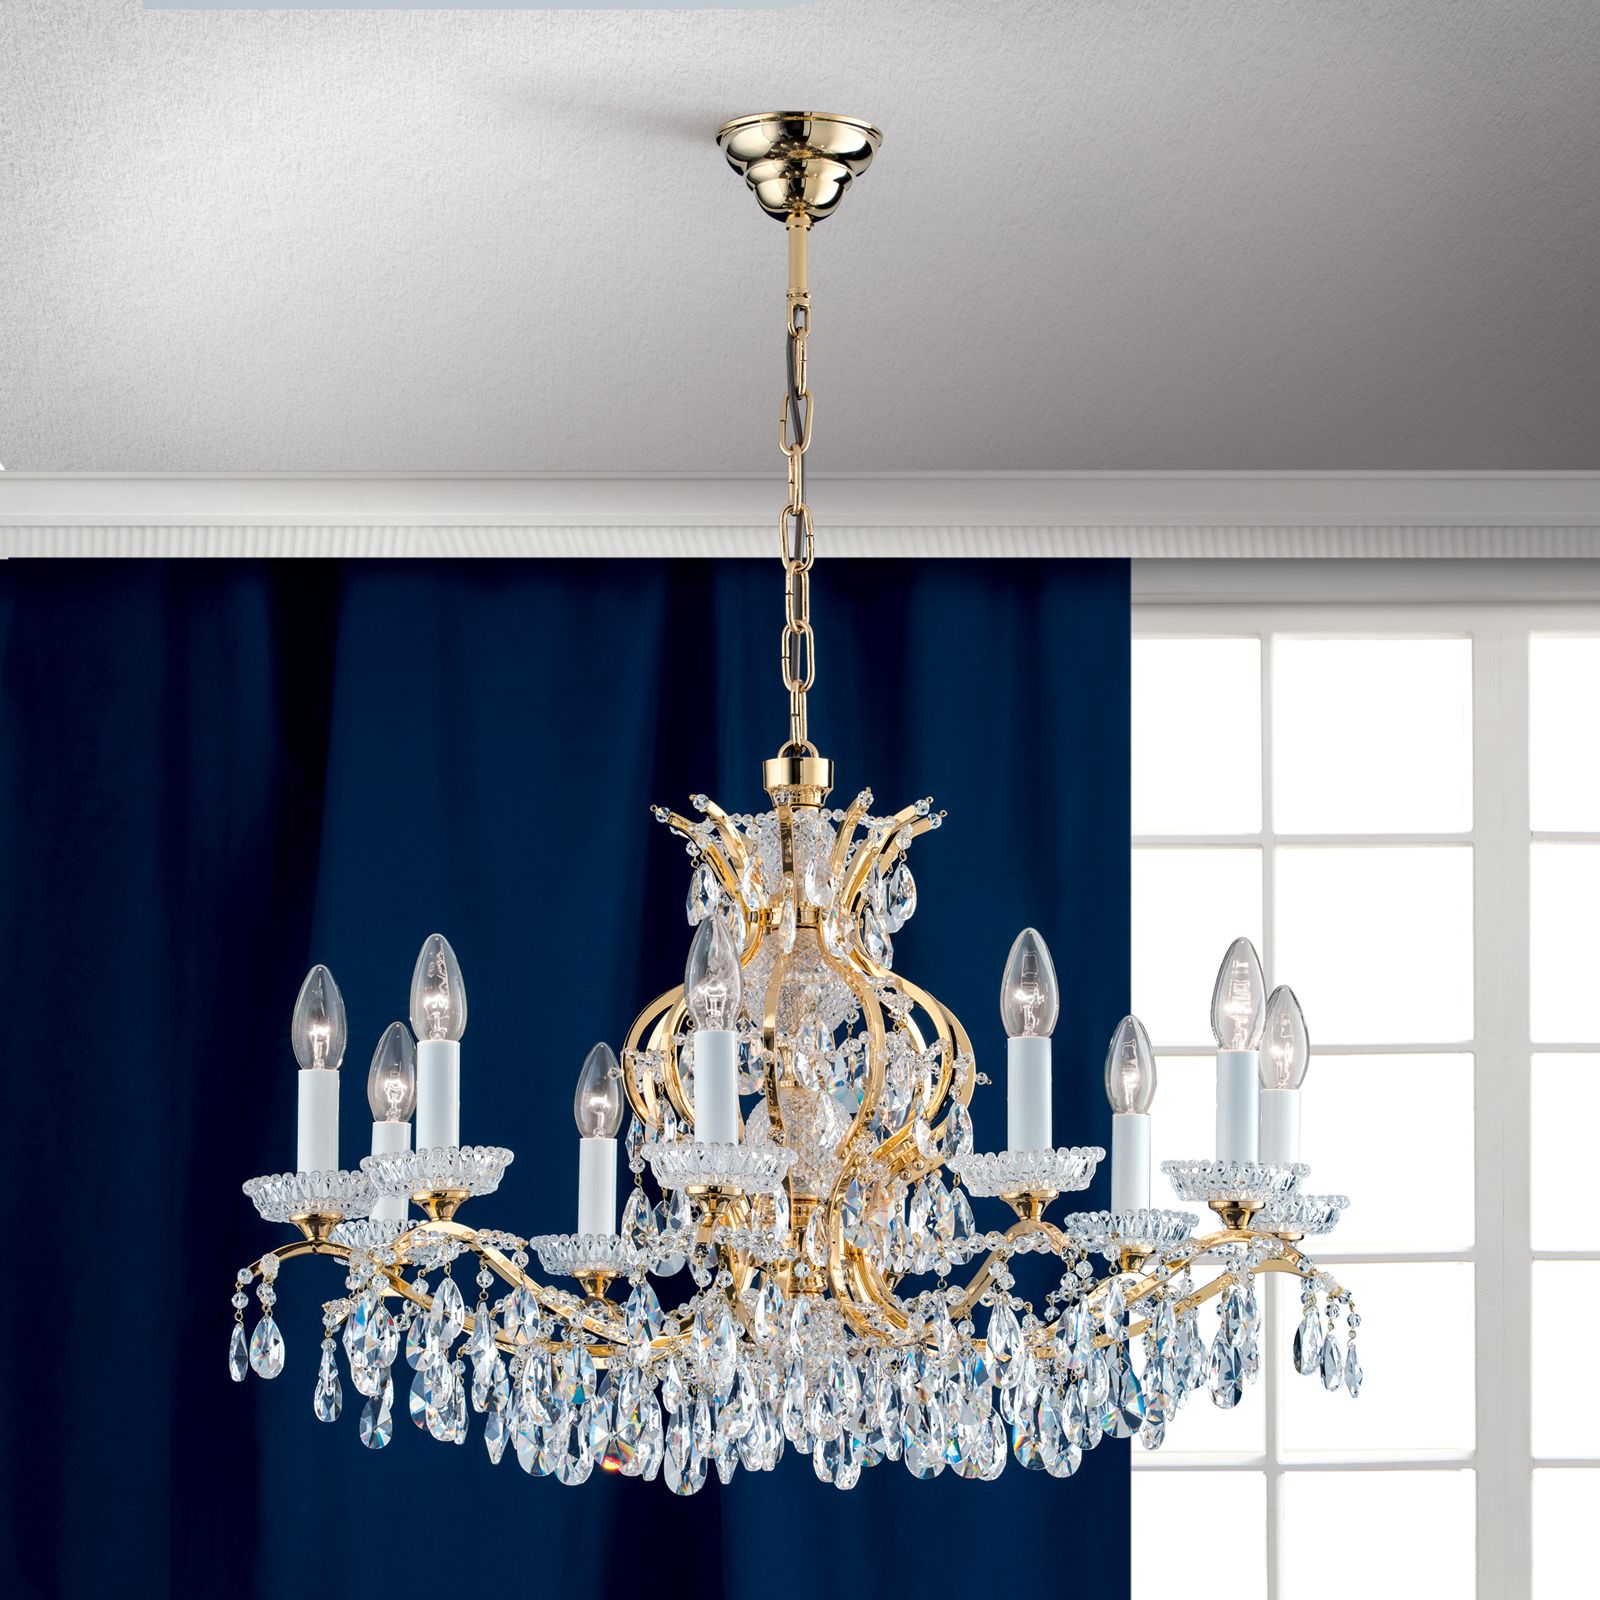 Hirohito crystal chandelier, 10 lamps and 24K gold plated